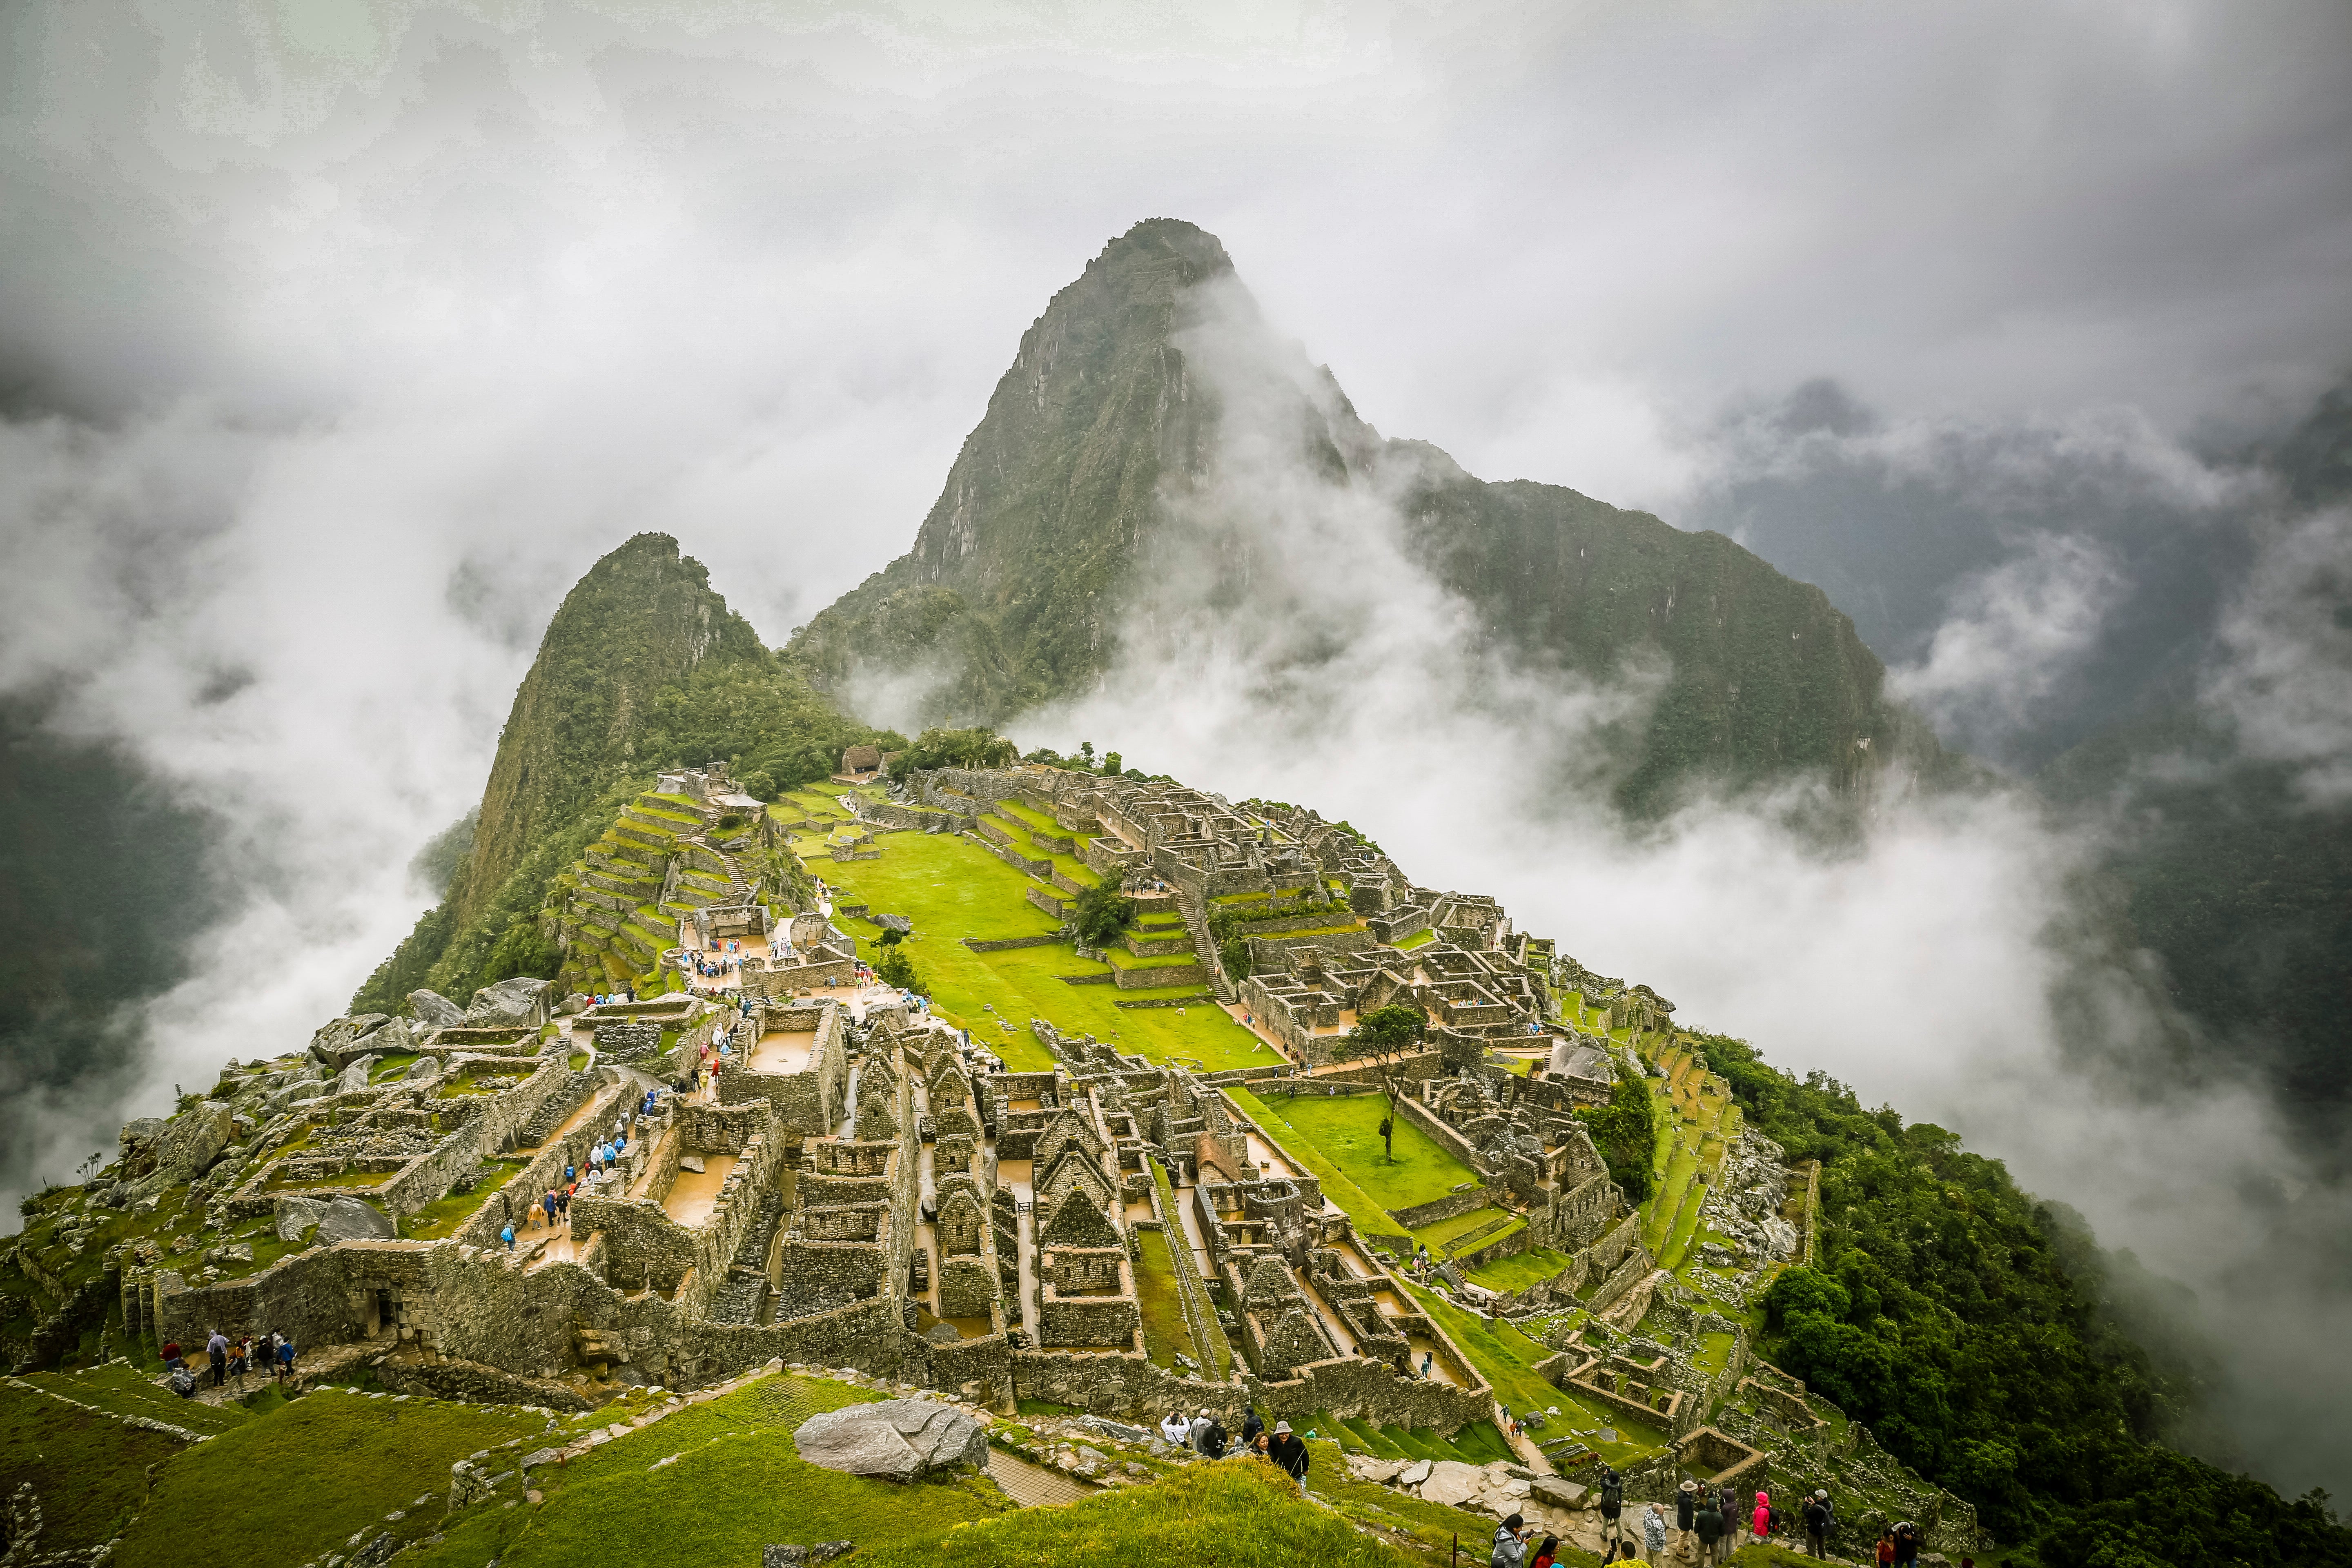 The Inca citadel is rightly seen as one of the most spectacular locations on Earth